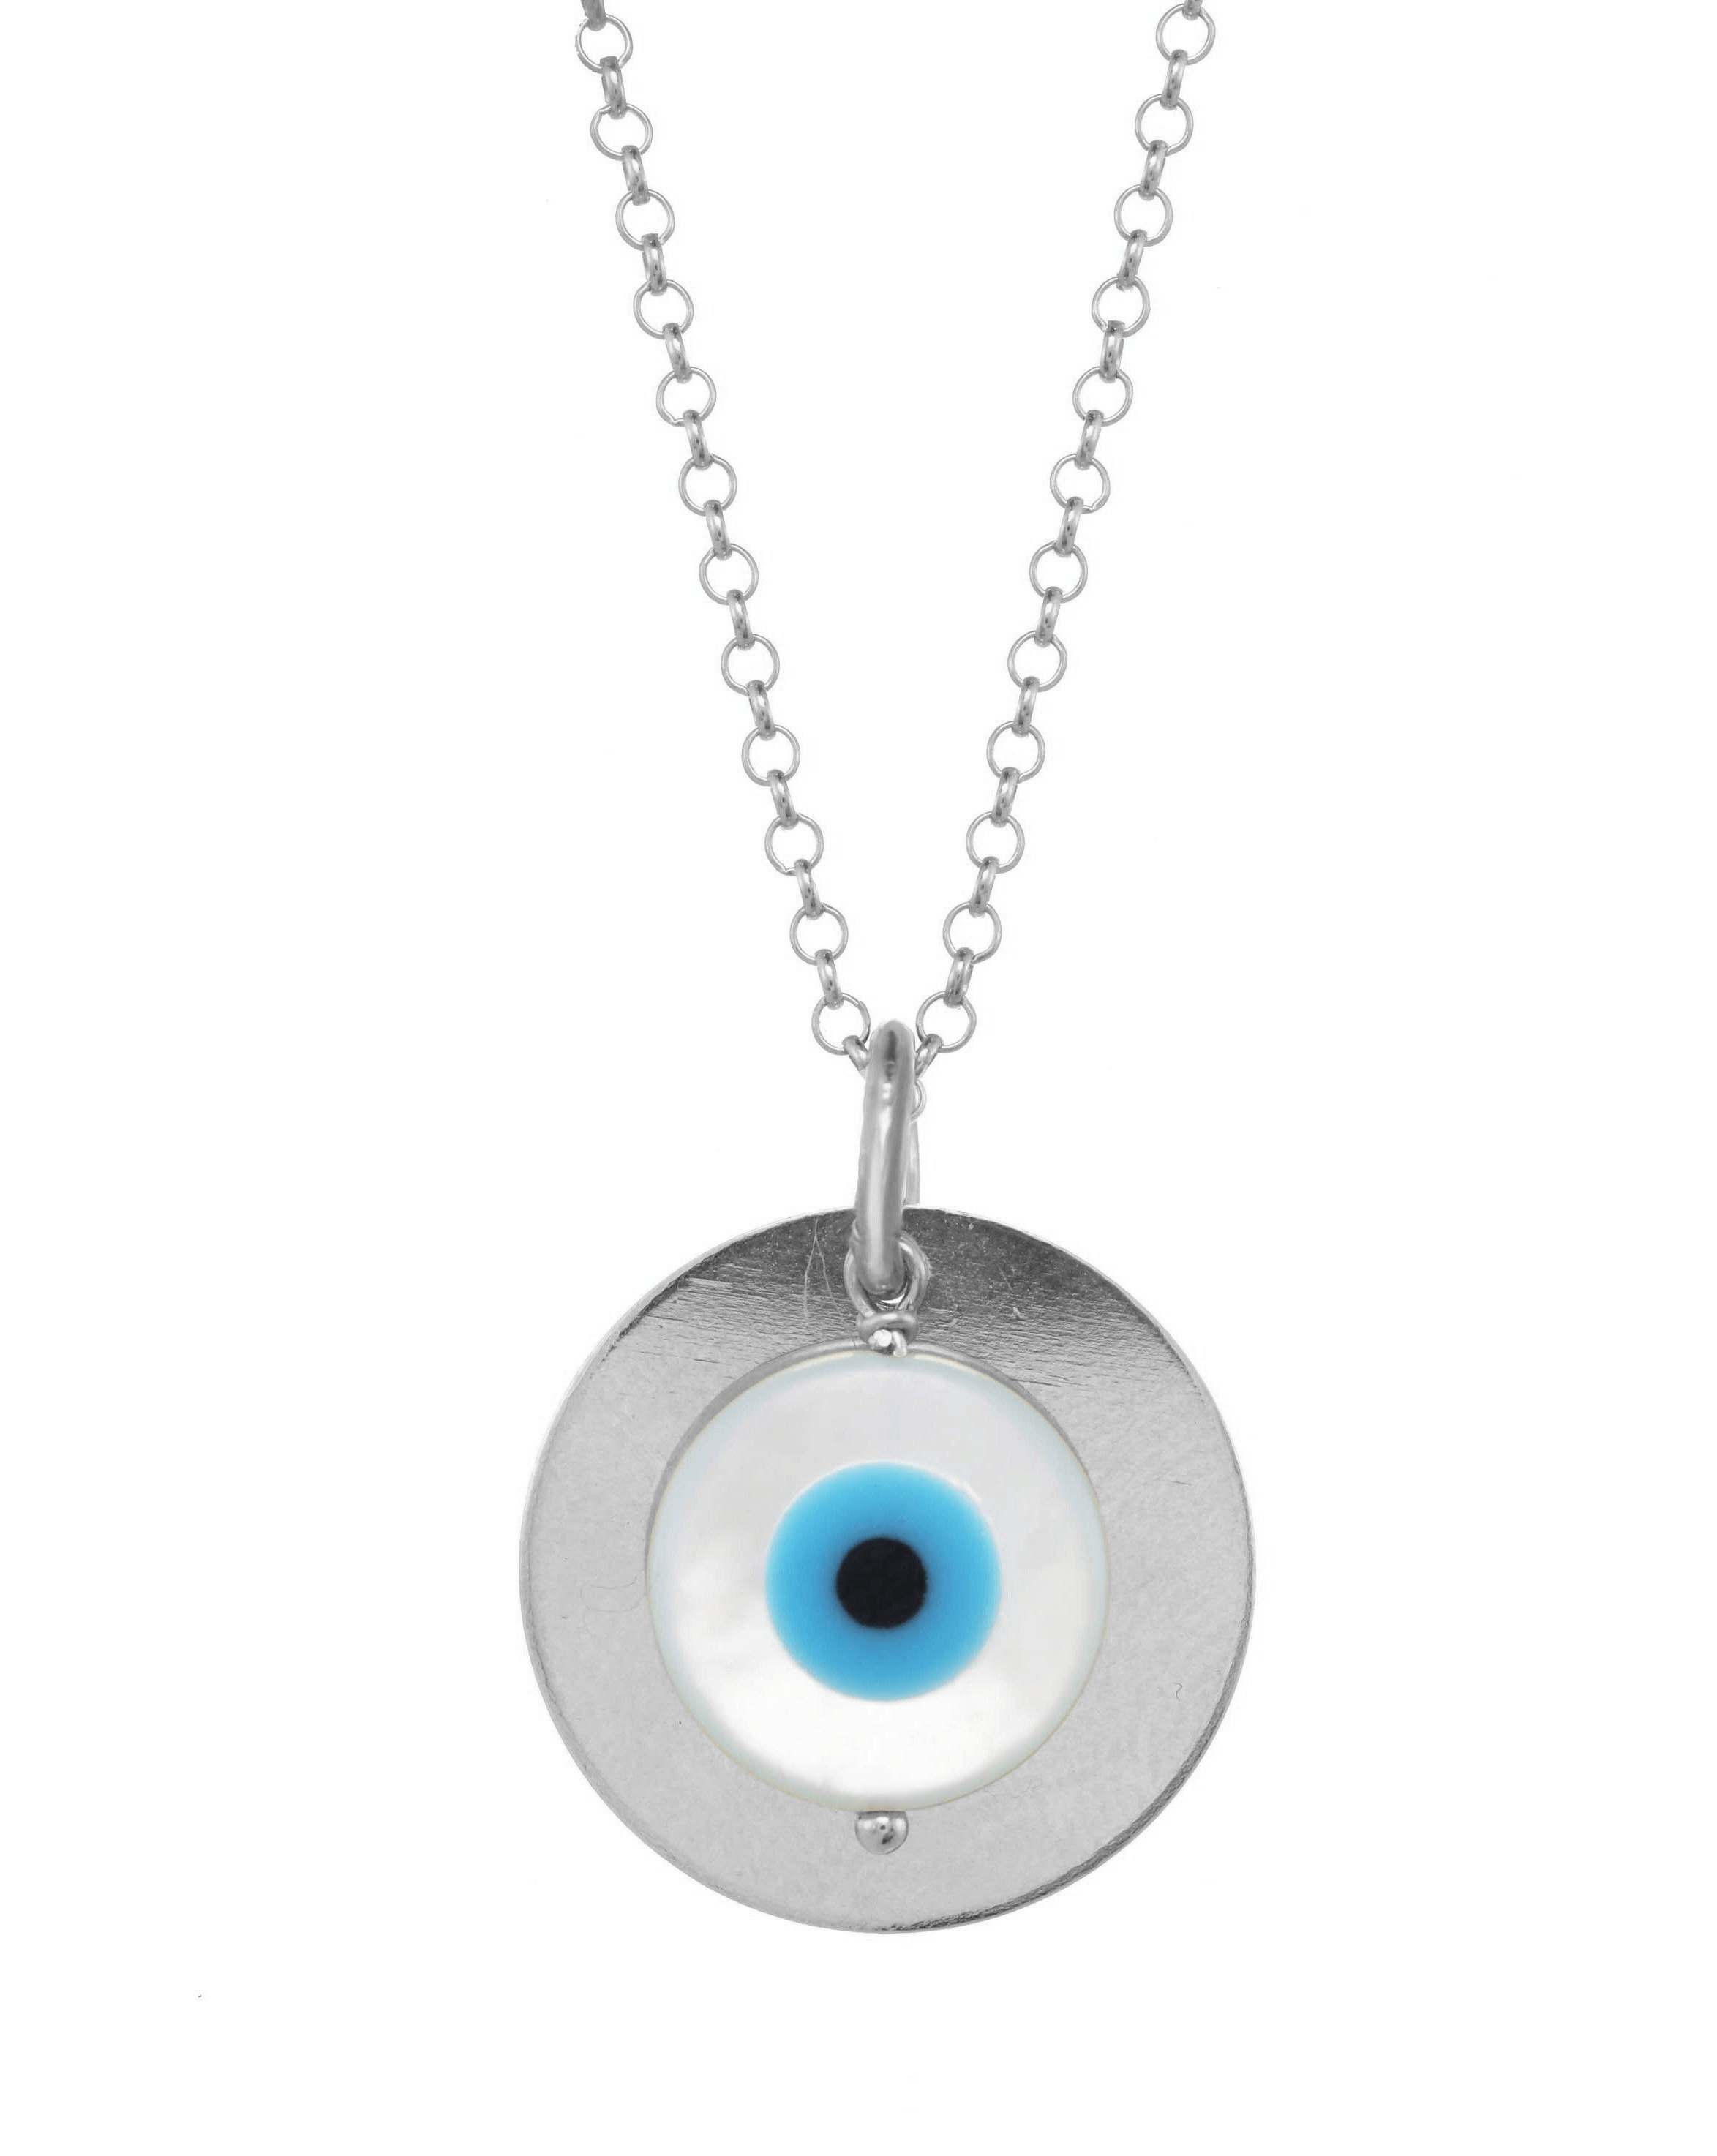 Iza Necklace by KOZAKH. An 18 to 20 inch adjustable length, 1mm thick Rollo chain necklace in Sterling Silver, featuring a 16mm Flat Coin and a 7mm hand carved Mother of Pearl evil eye charm.